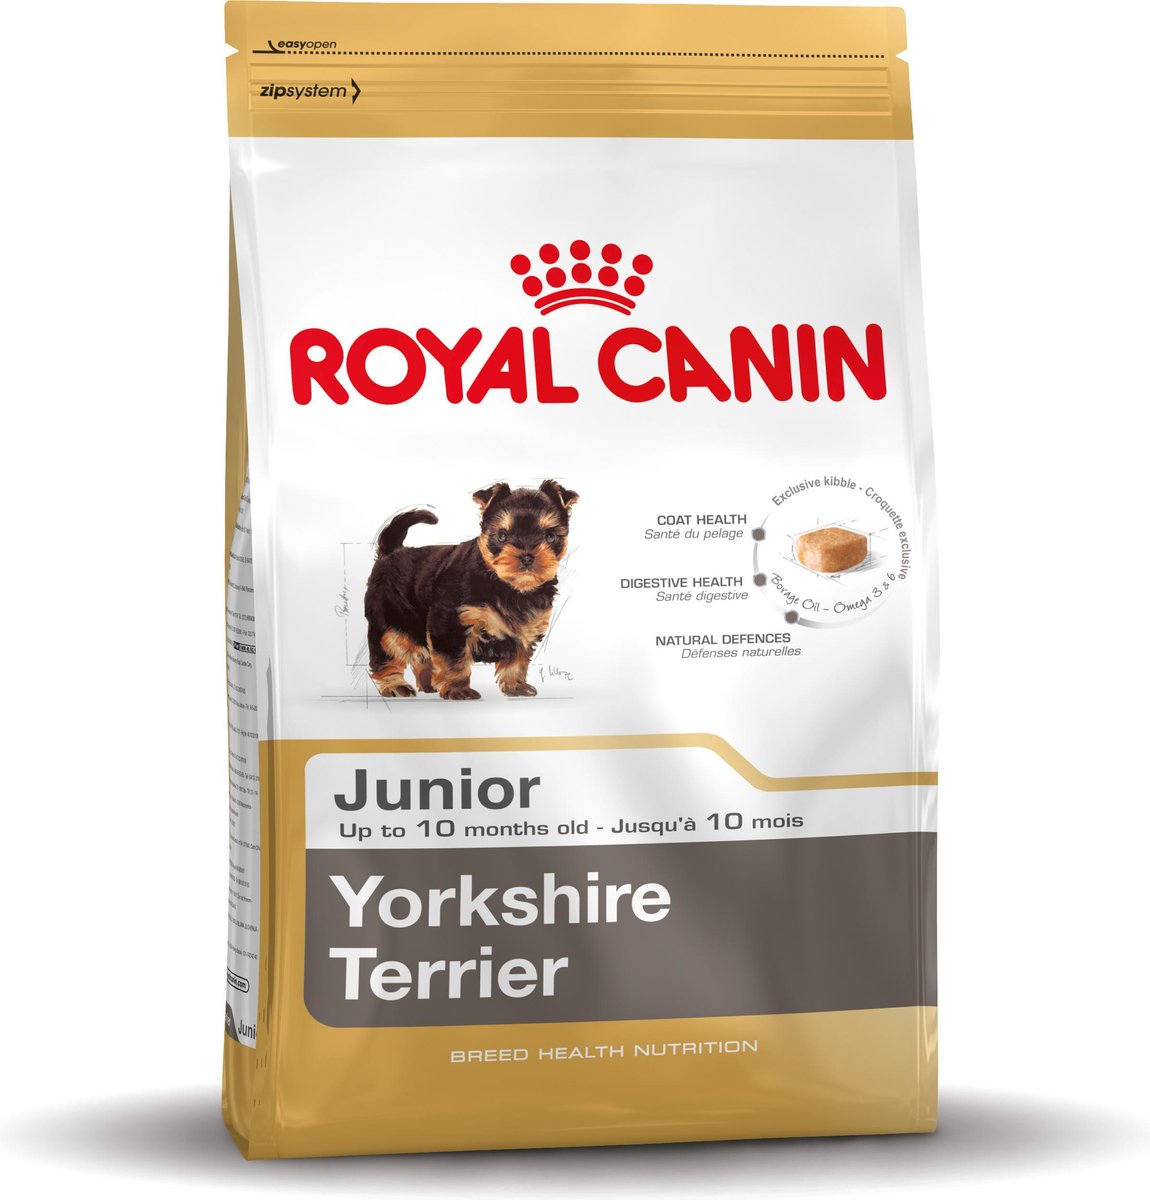 Royal Canin Yorkshire Terrier Puppy voer 1.5kg